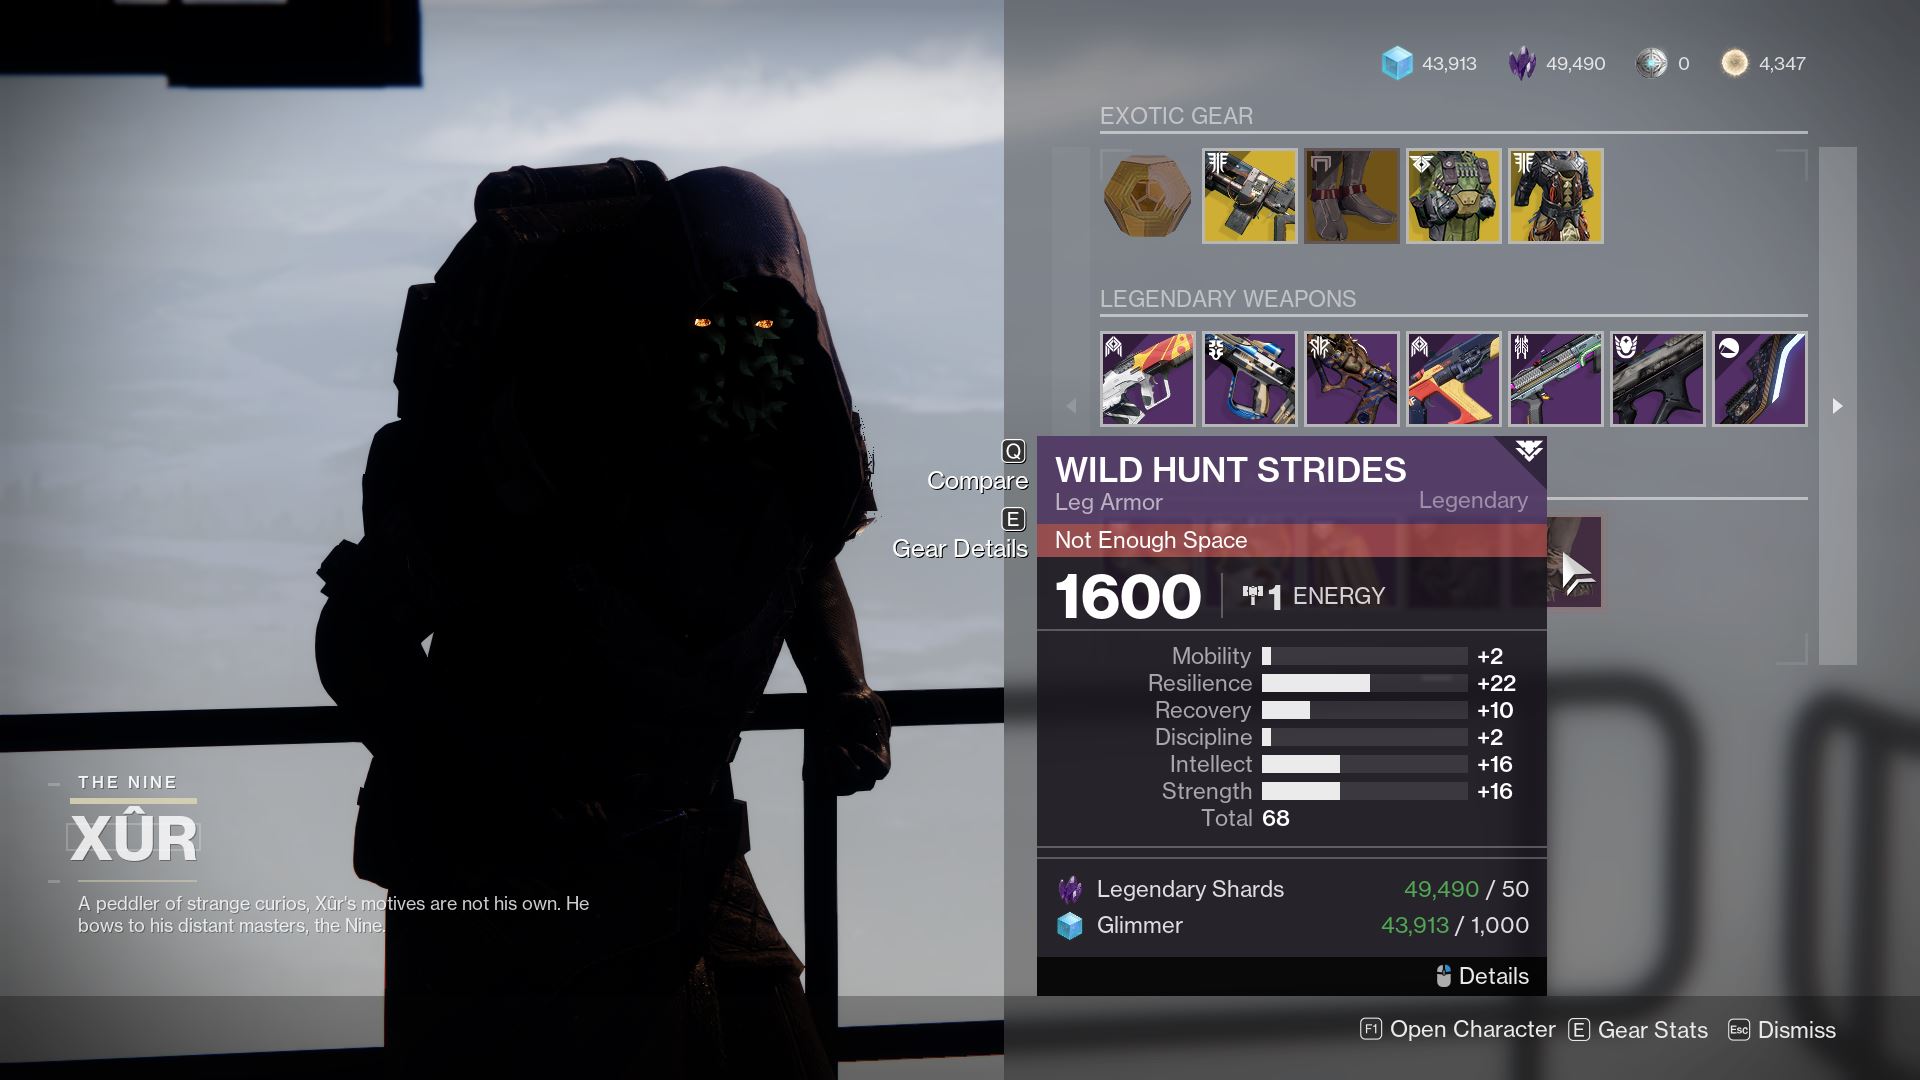 Where Is Xur Today In Destiny 2? Location And Exotic Inventory (September 22 - 26)